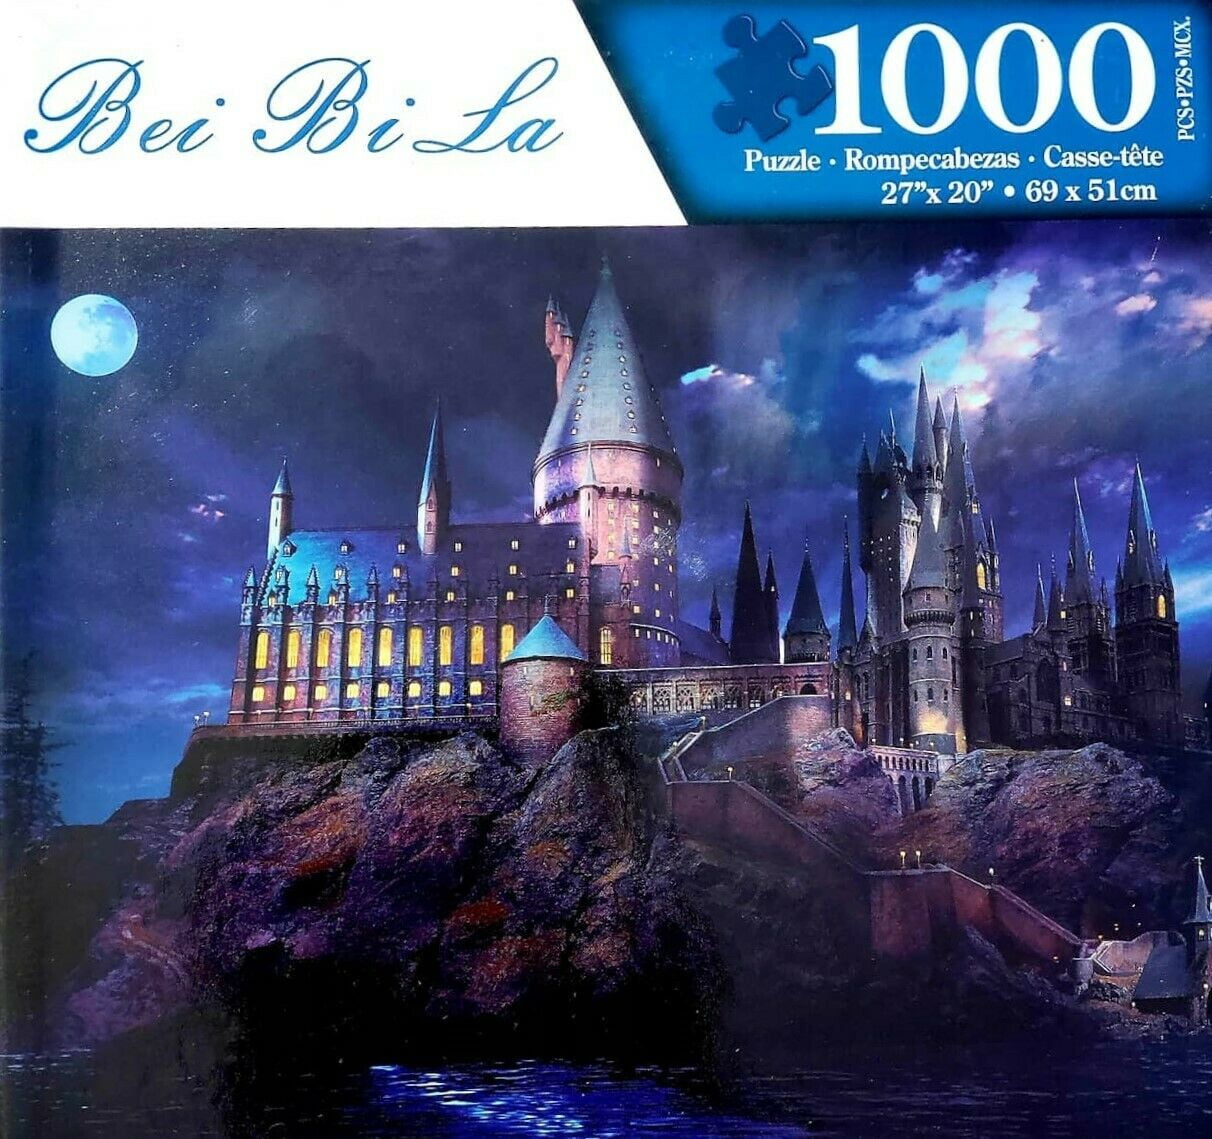 Hogwarts Jigsaw 1000Pc Castle Puzzle Harry Poter Adult Kid Educational Toy Game 